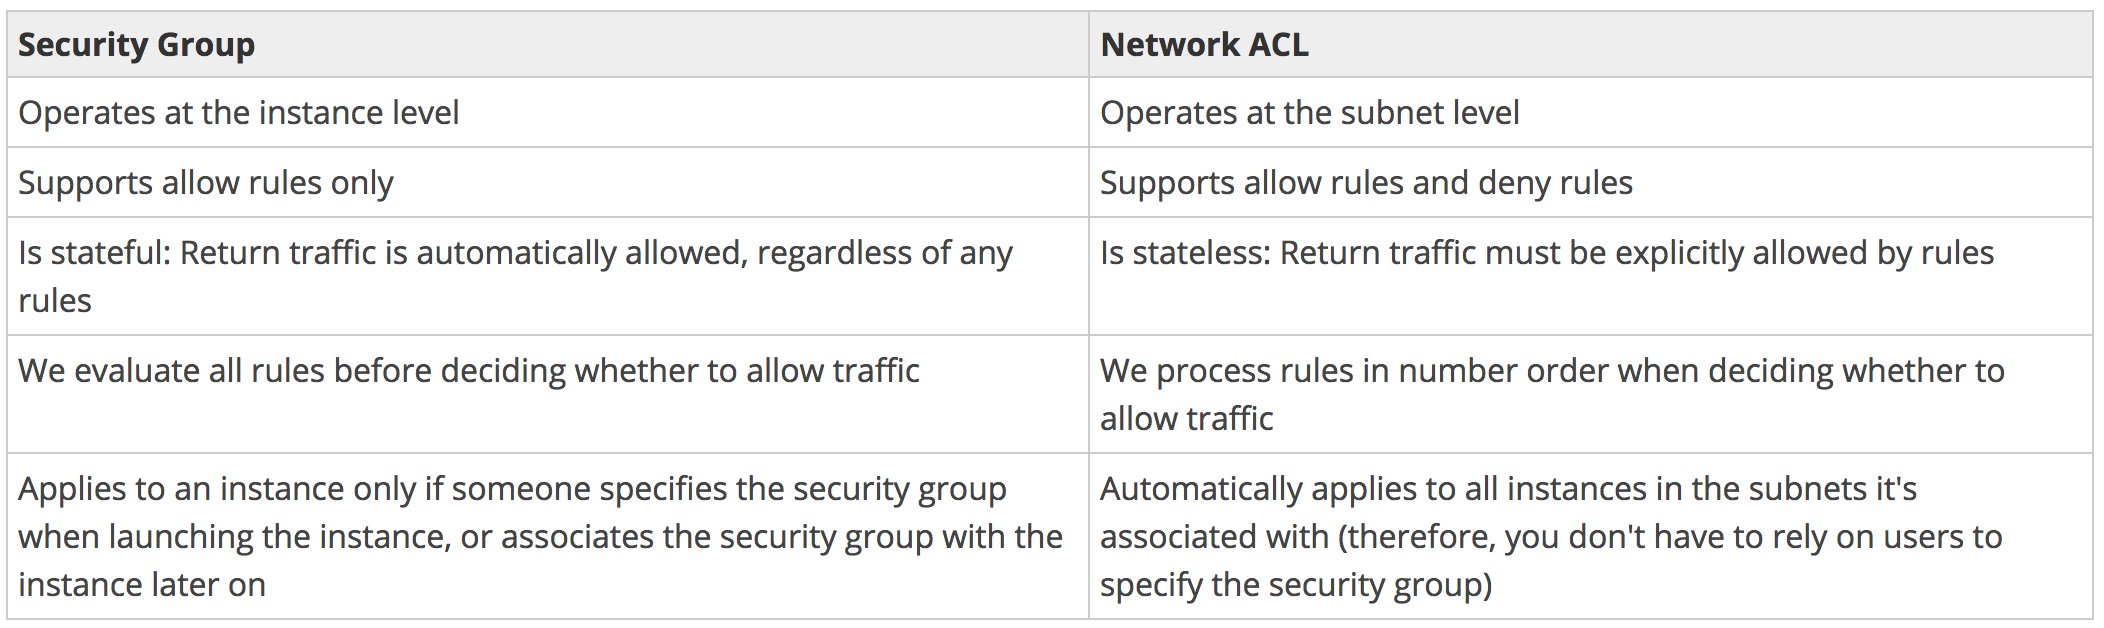 Security Group v Network ACL